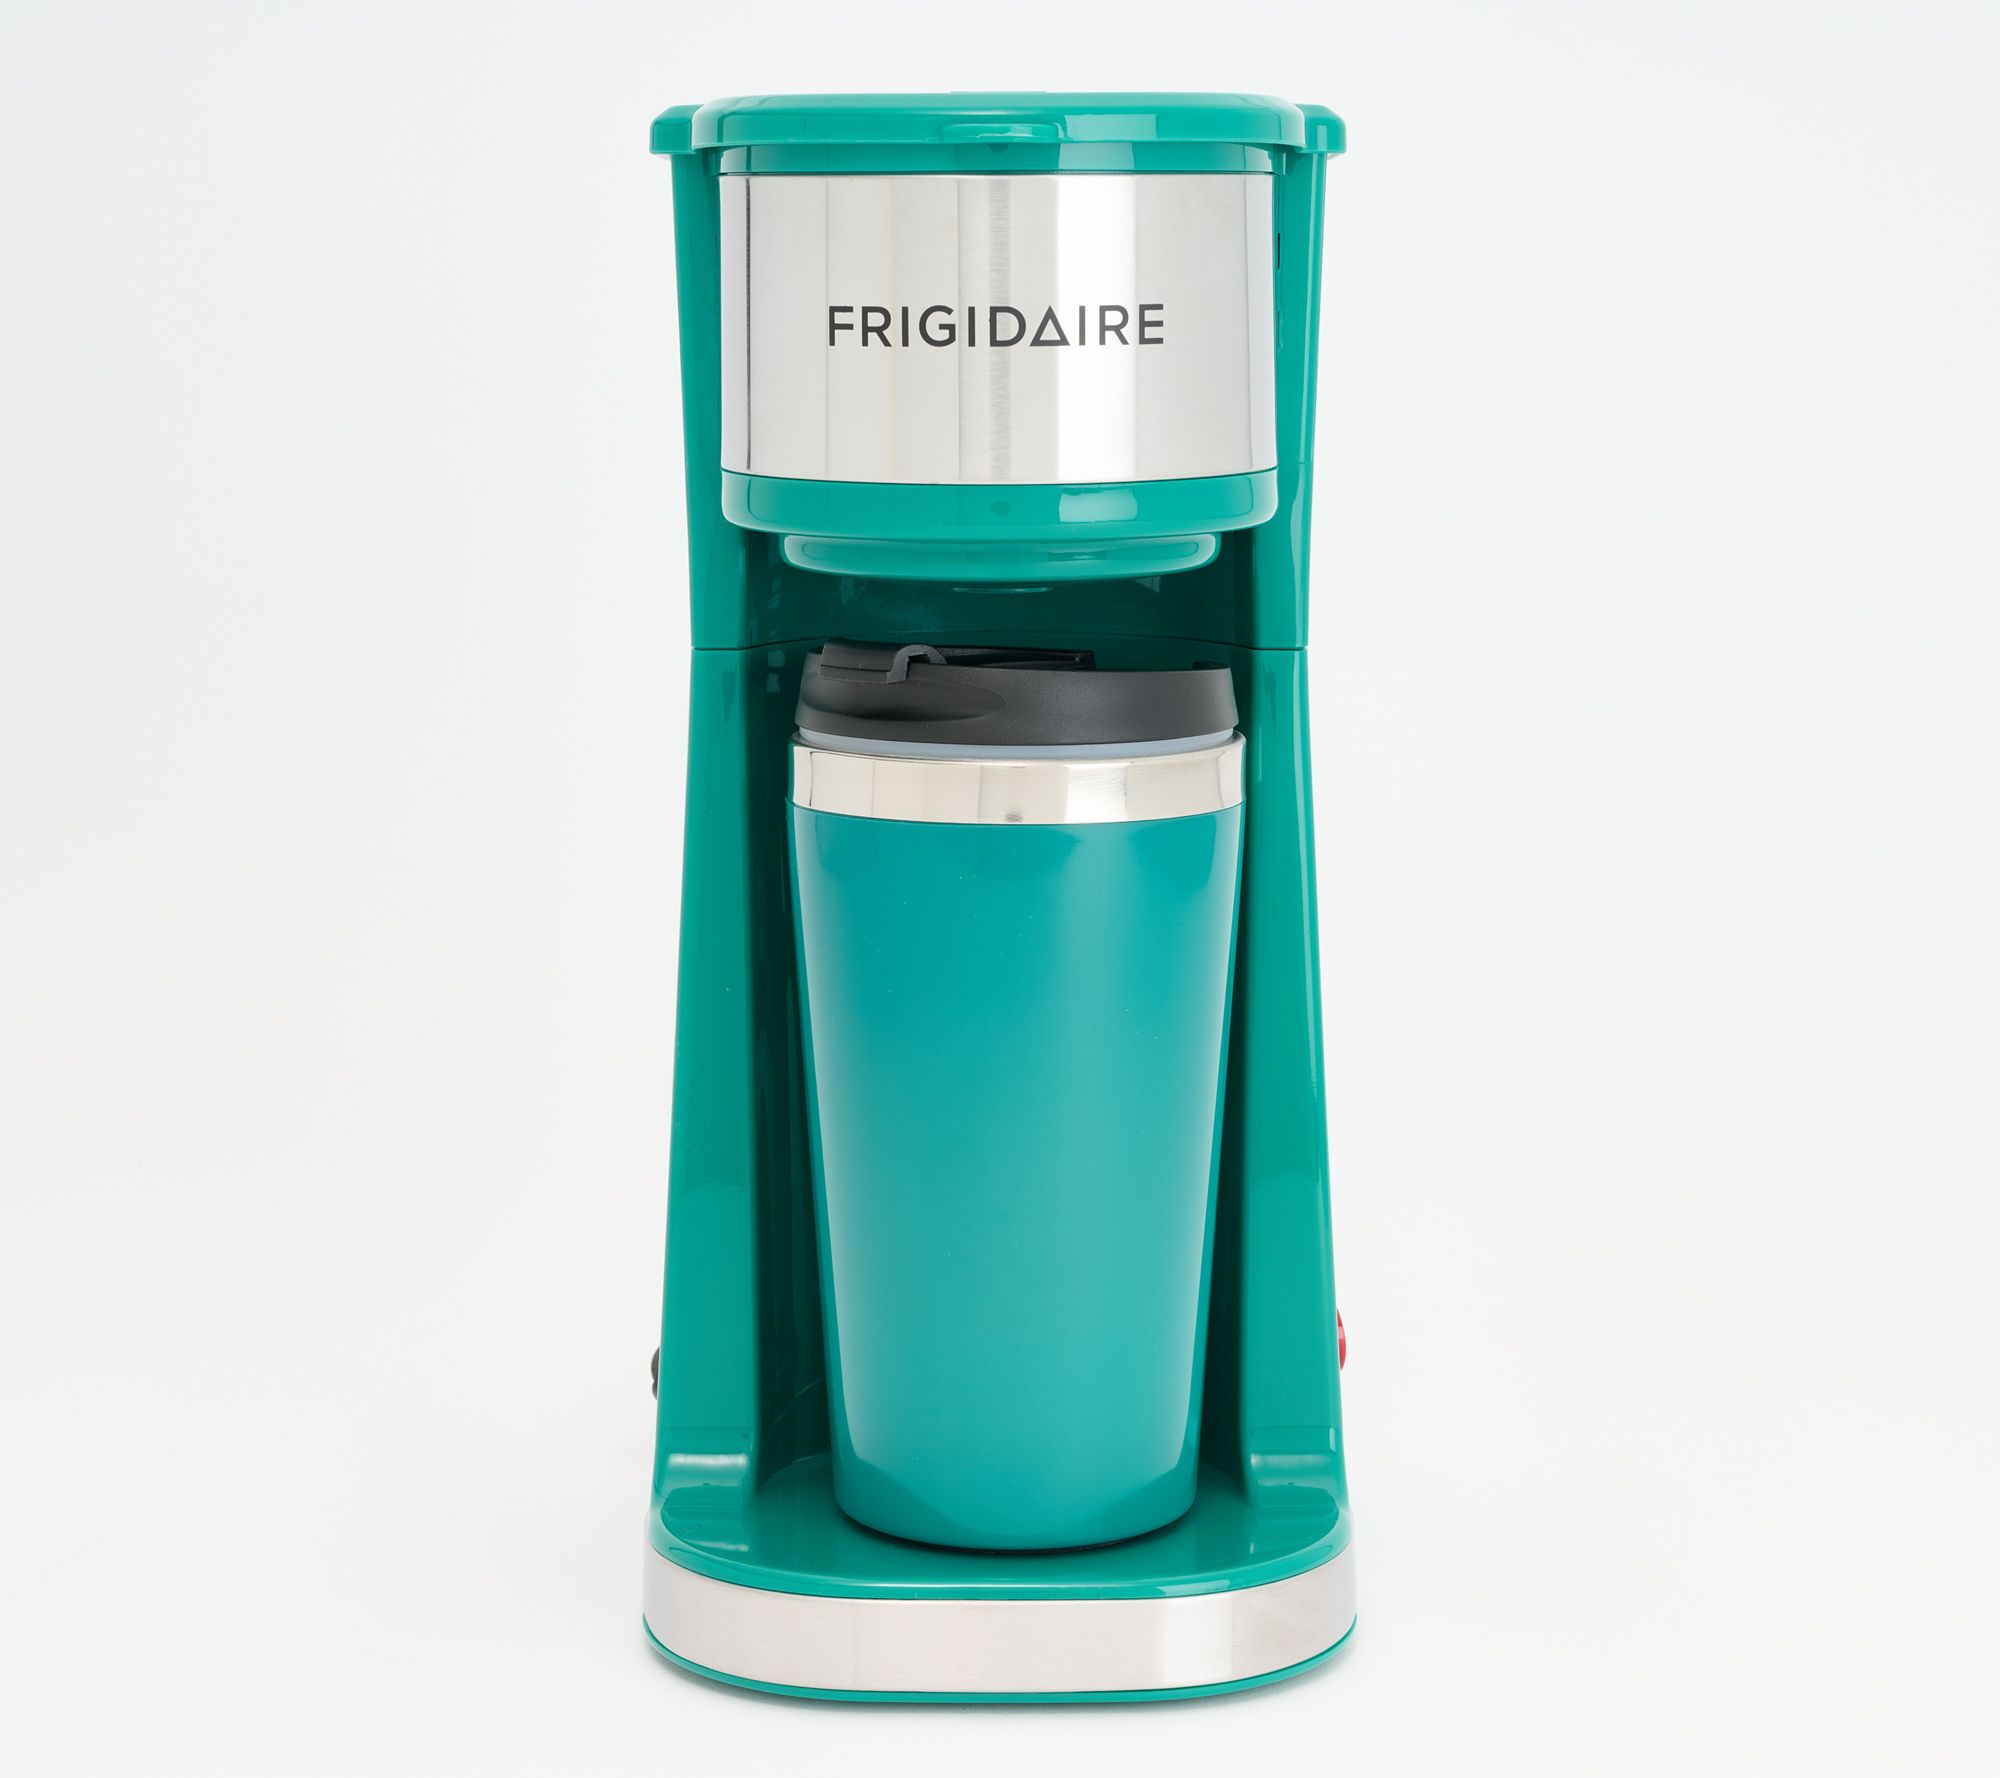 Frigidaire Stainless Steel Single Cup Coffee Maker with Travel Mug 